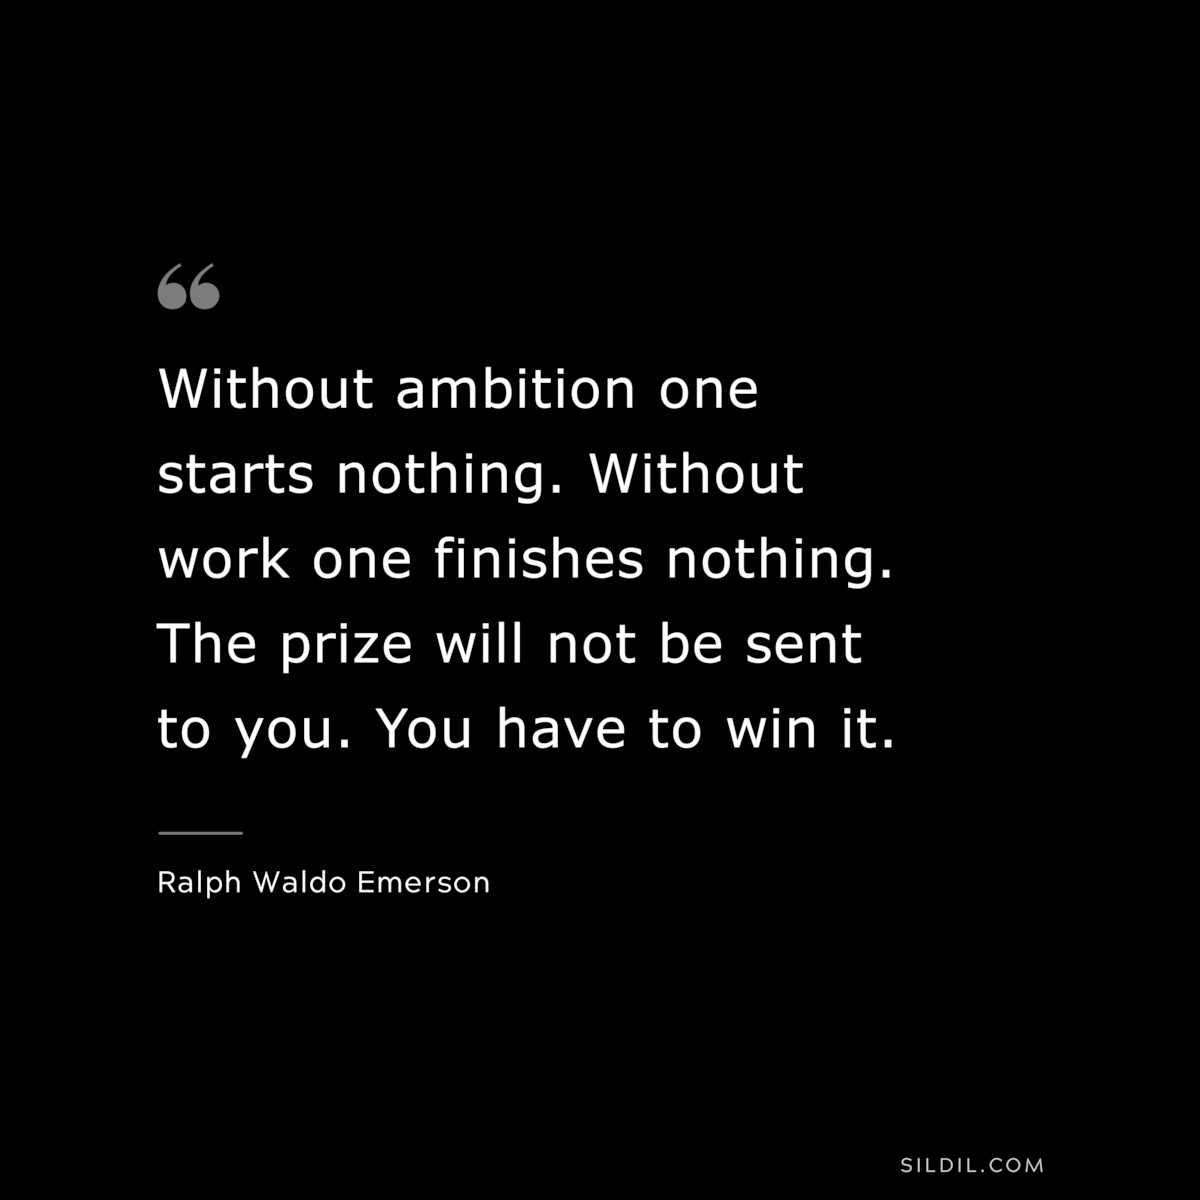 Without ambition one starts nothing. Without work one finishes nothing. The prize will not be sent to you. You have to win it. — Ralph Waldo Emerson